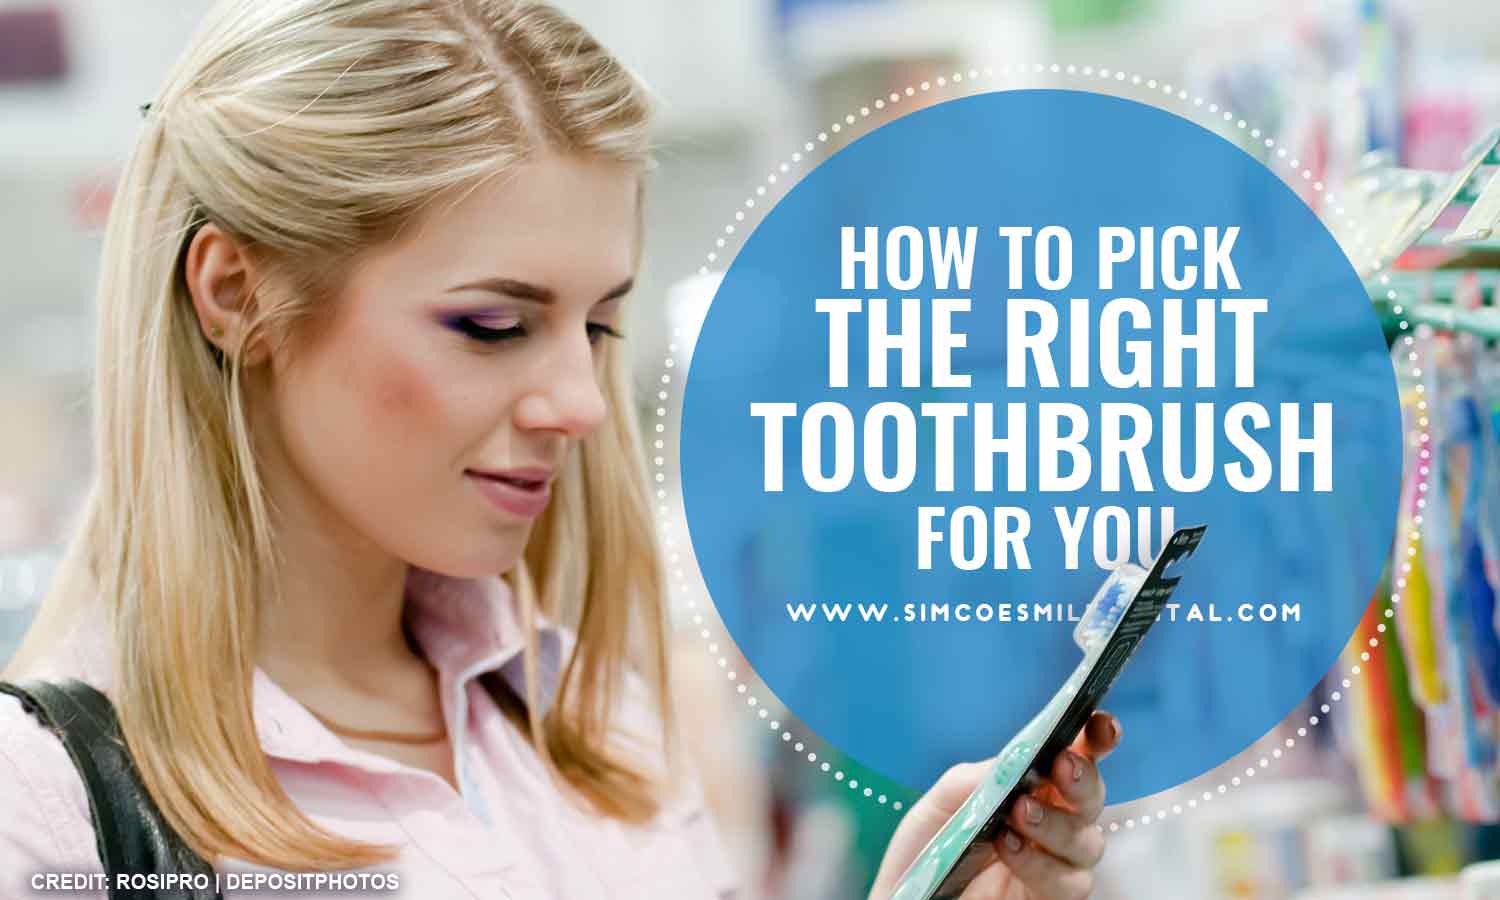 How to Pick the Right Toothbrush for You